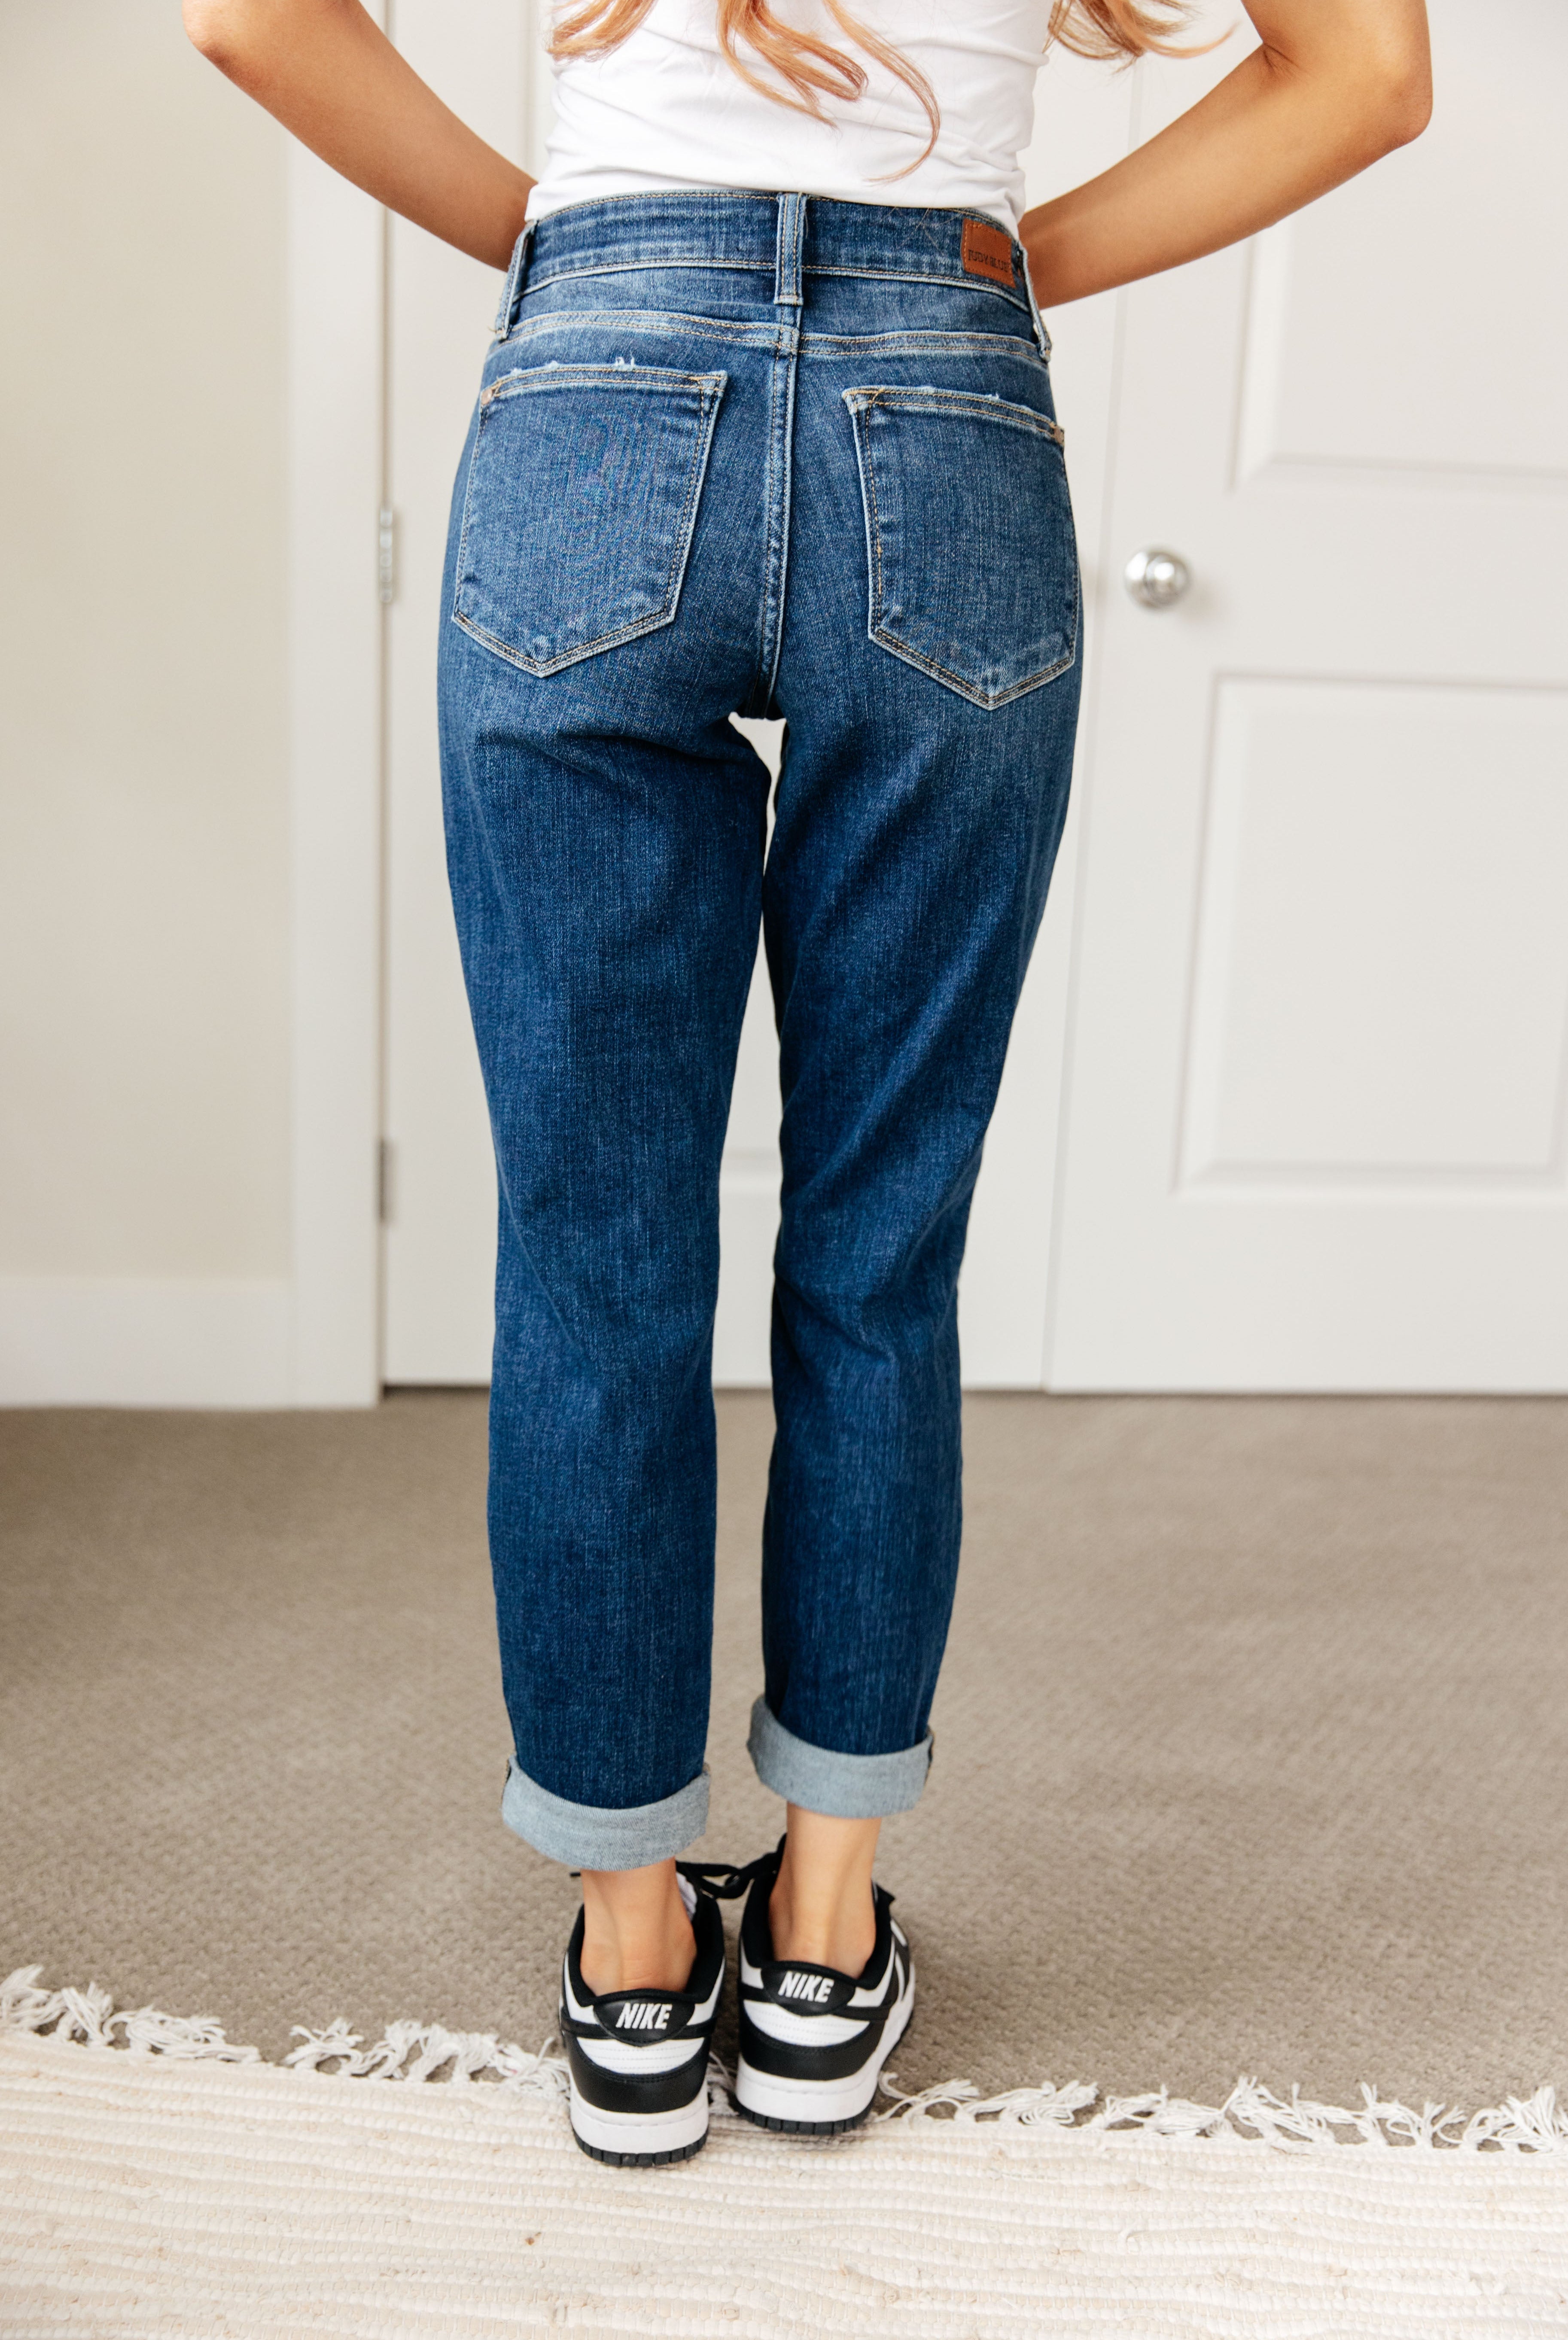 London Midrise Cuffed Boyfriend Jeans-Jeans- Simply Simpson's Boutique is a Women's Online Fashion Boutique Located in Jupiter, Florida